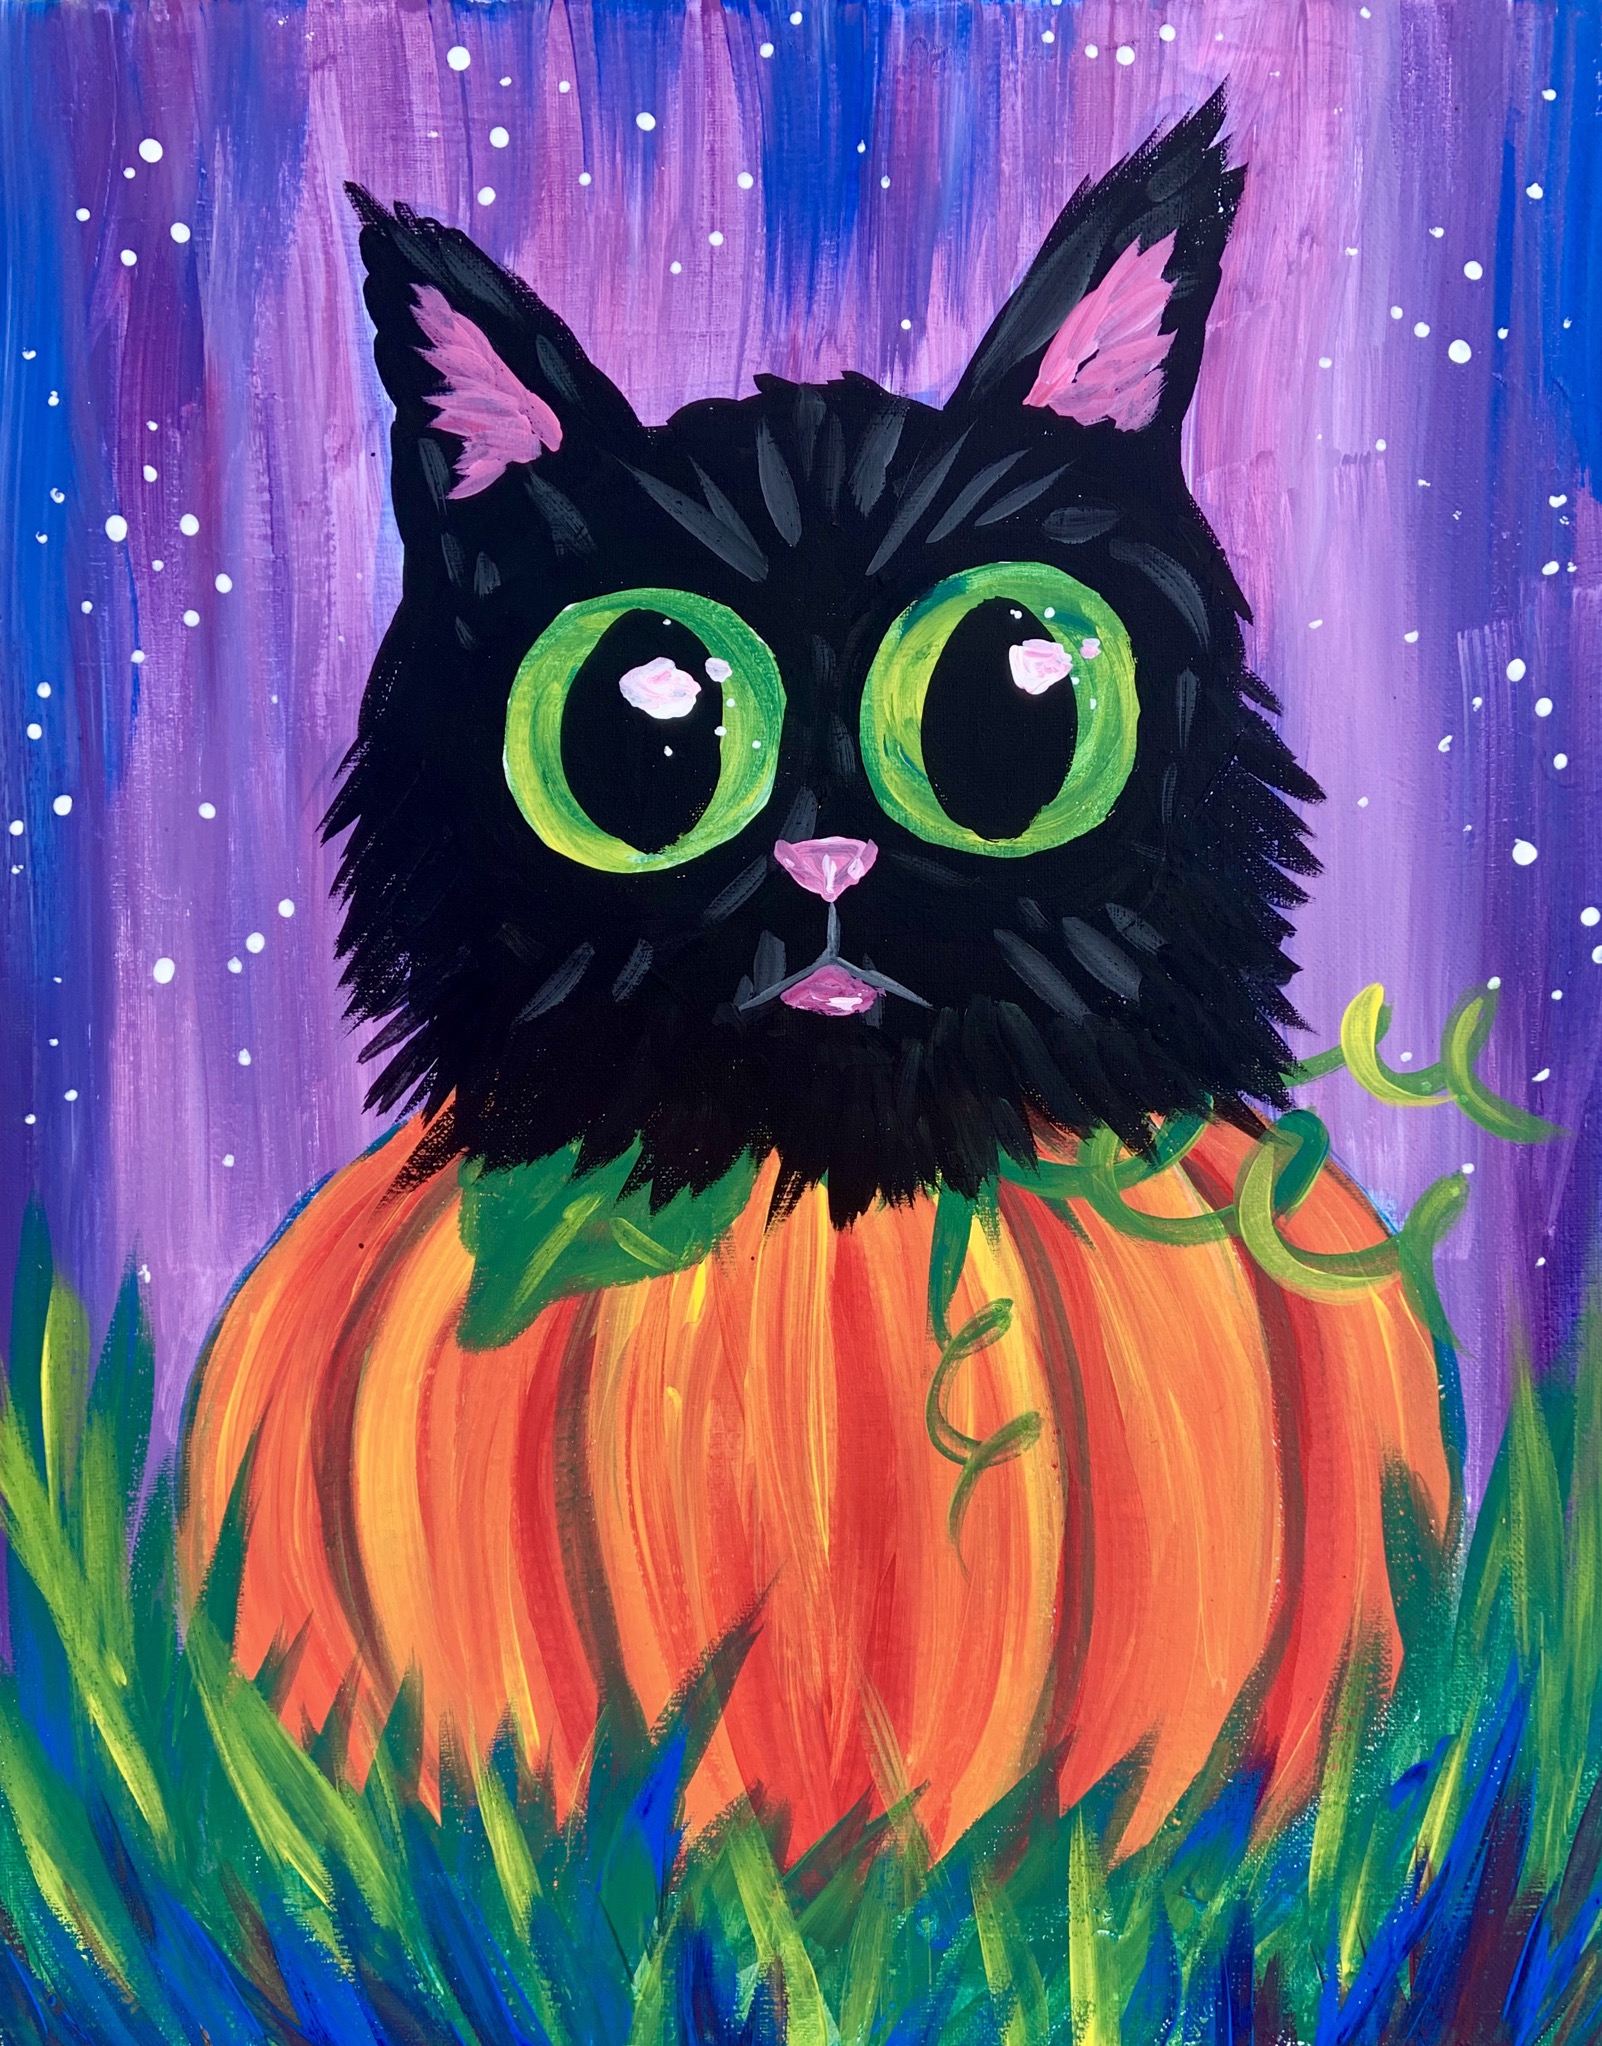 A Pumpkin Cat experience project by Yaymaker